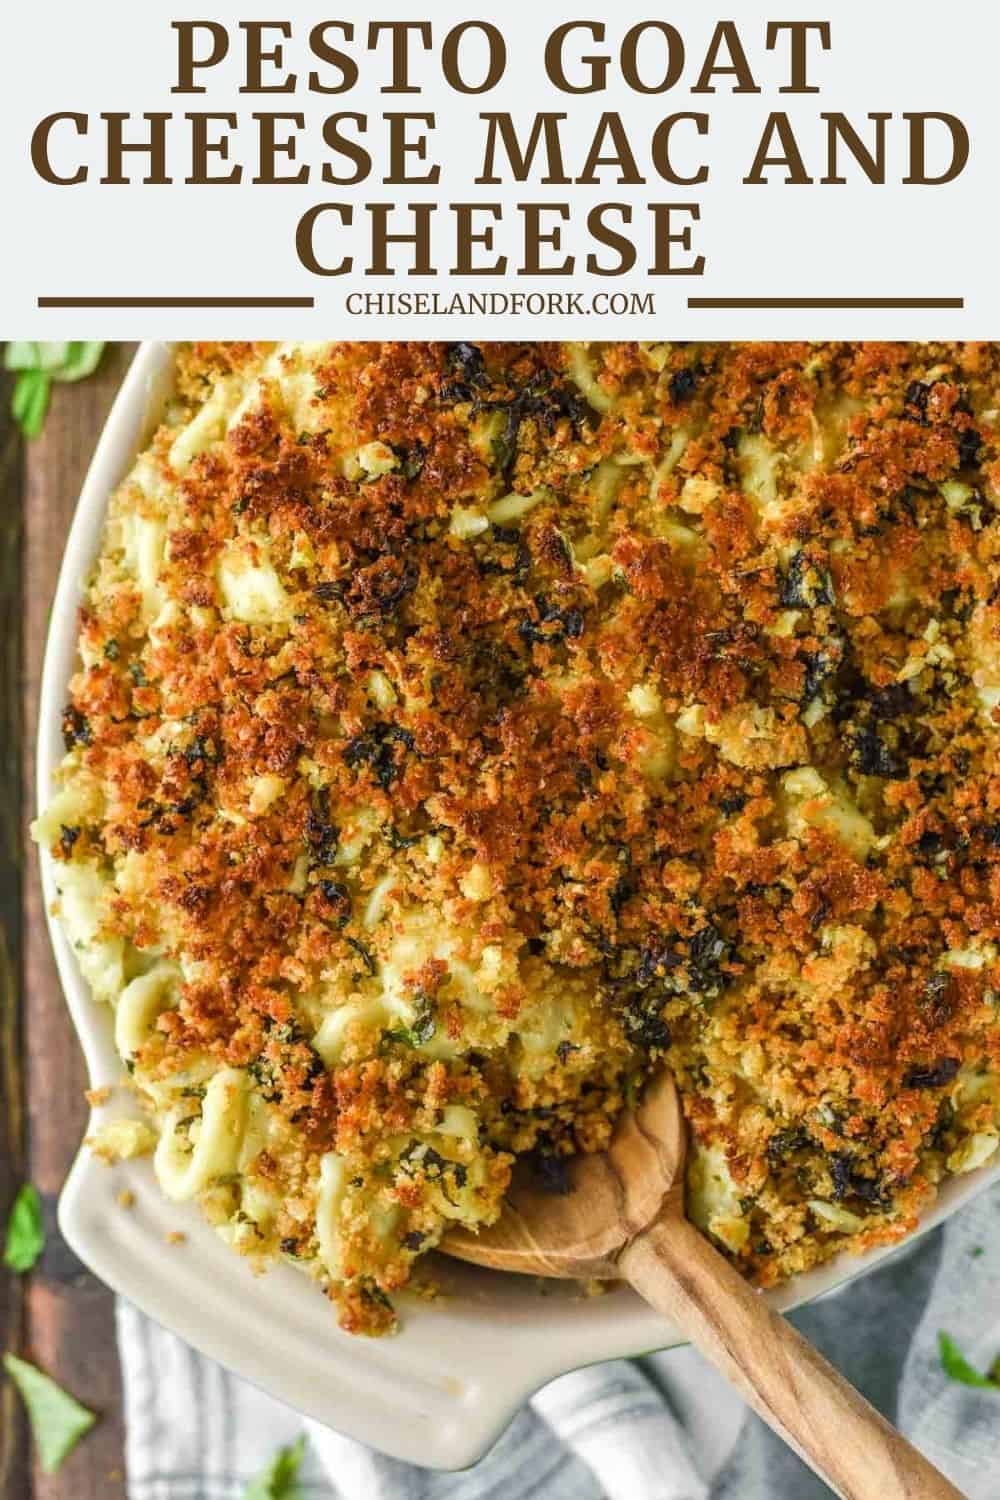 Pesto Goat Cheese Mac and Cheese - Chisel & Fork